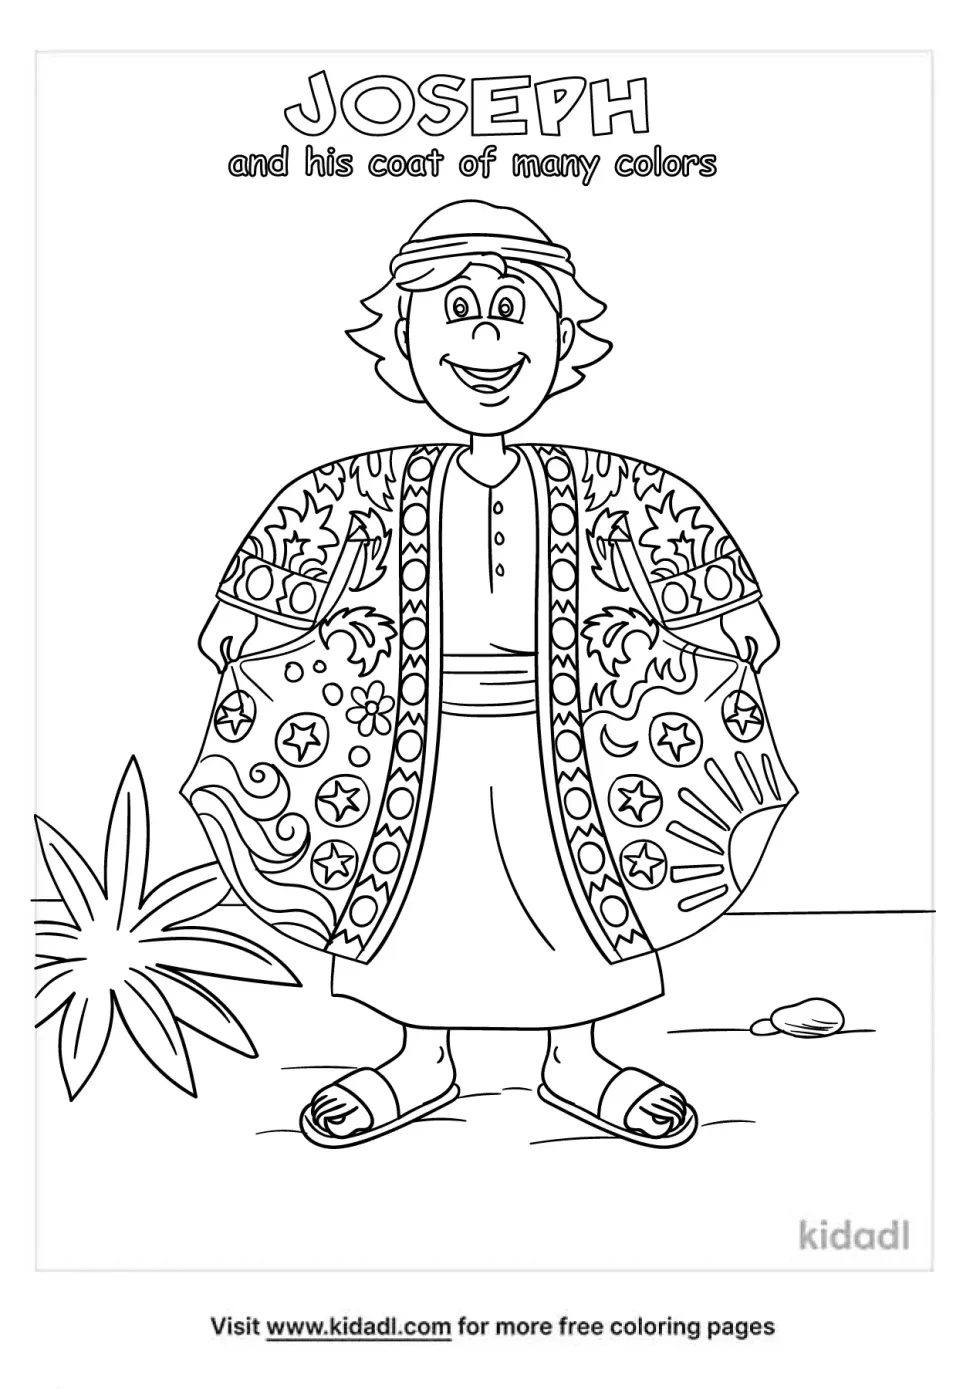 Coat Of Many Colors Coloring Page